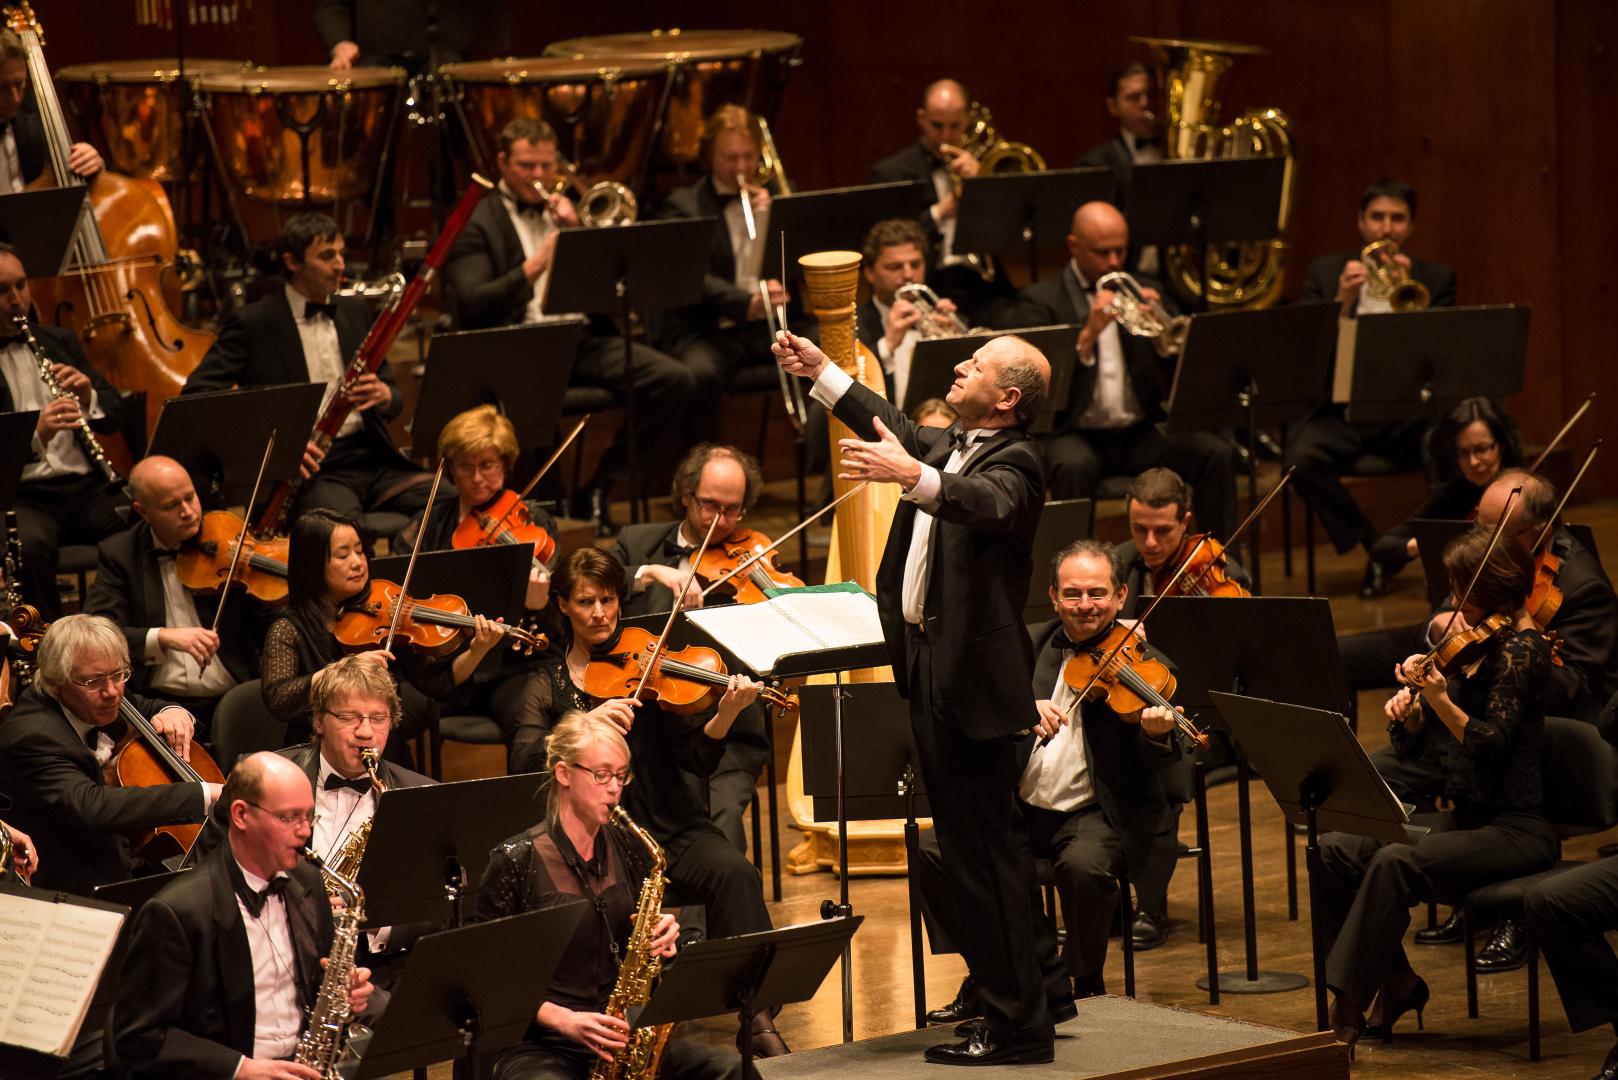 Hungarian Orchestra Brings Down the House On European Tour